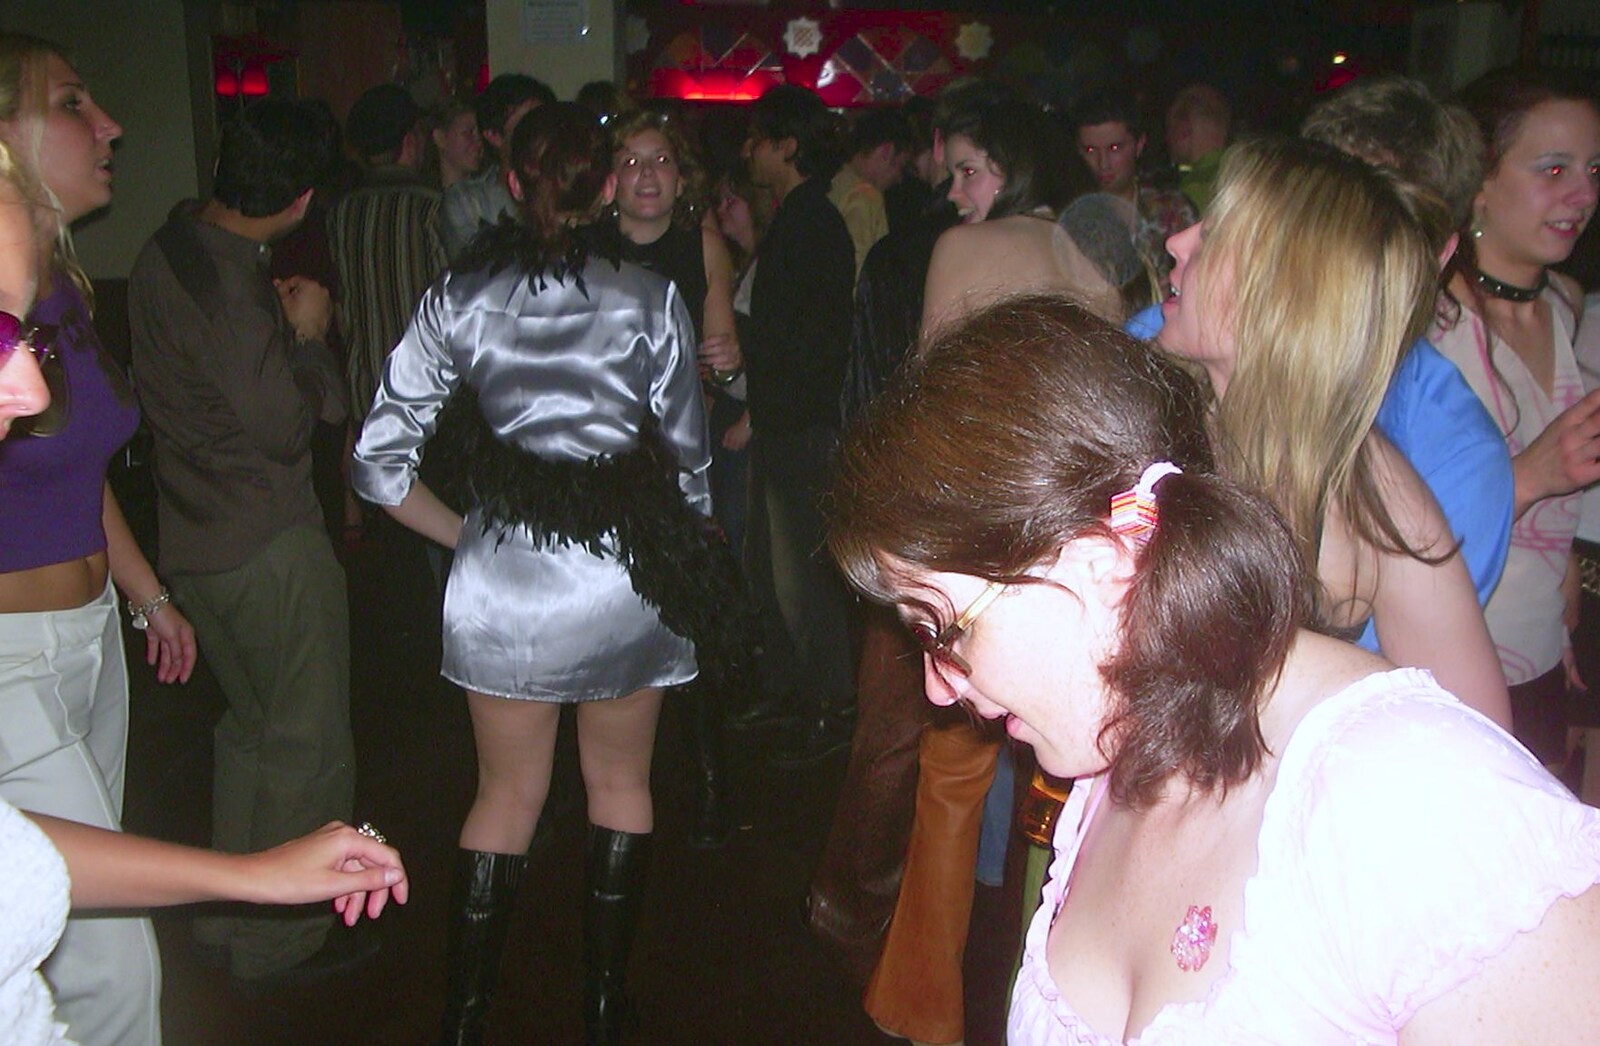 More dancing in Car Wash from 3G Lab's Carwash Nightclub by Limo, London - 27th April 2002